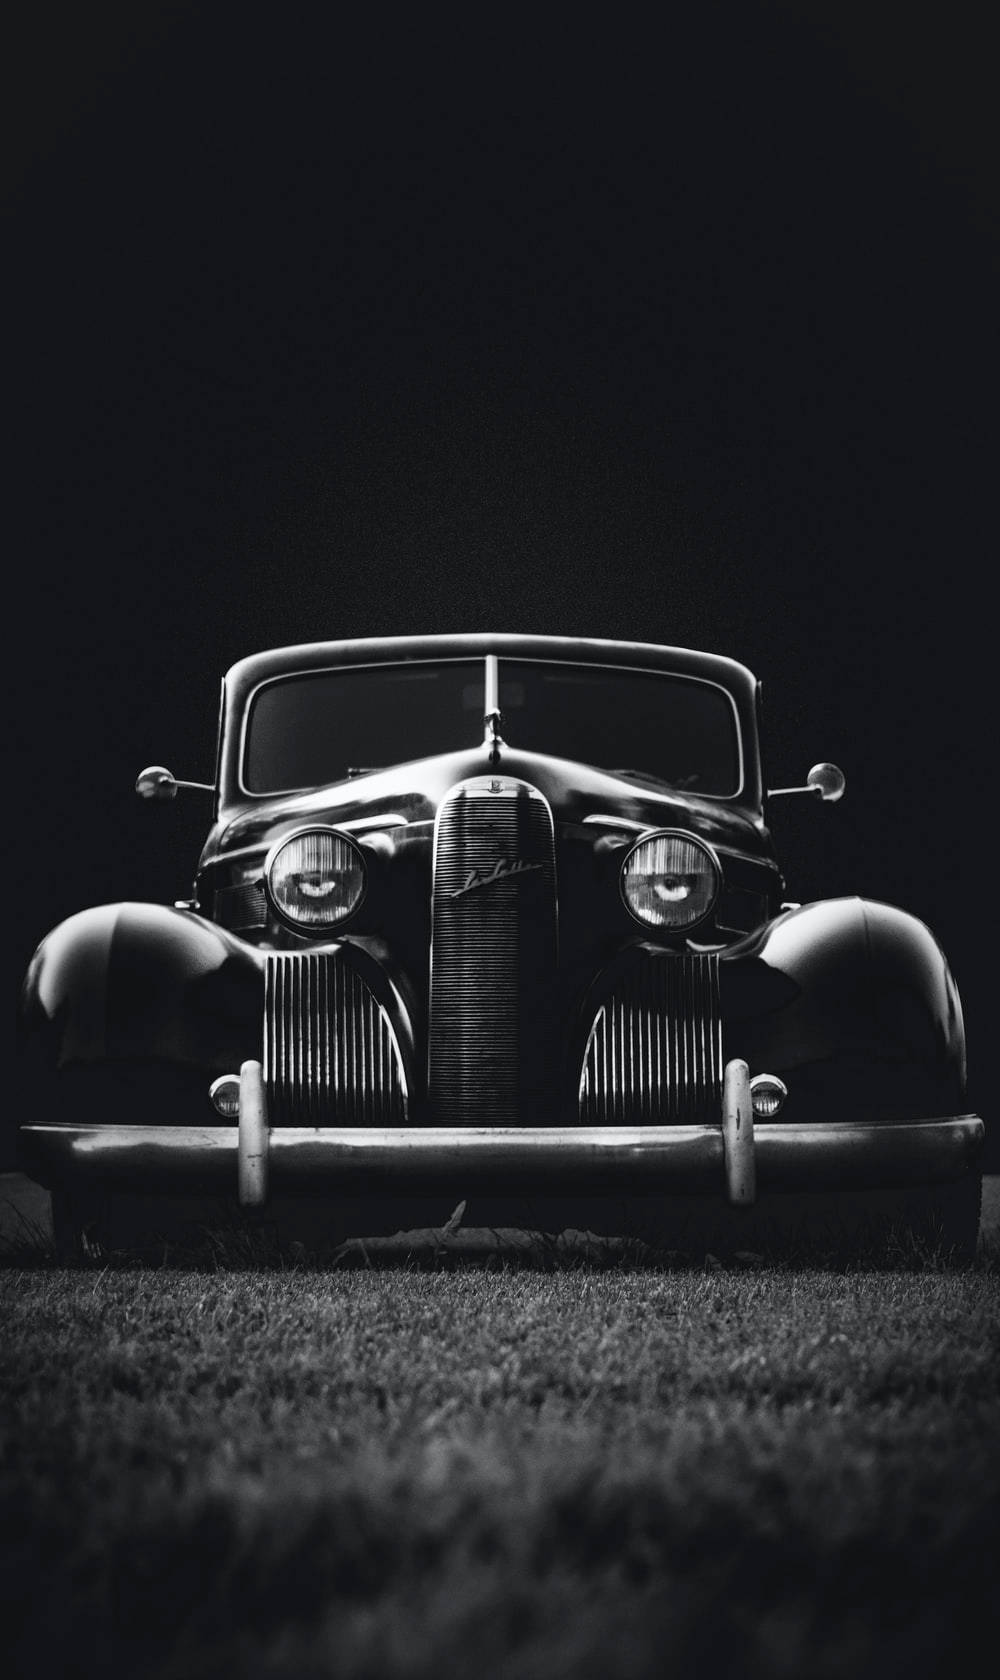 Hd Vintage Car In Black And White Wallpaper